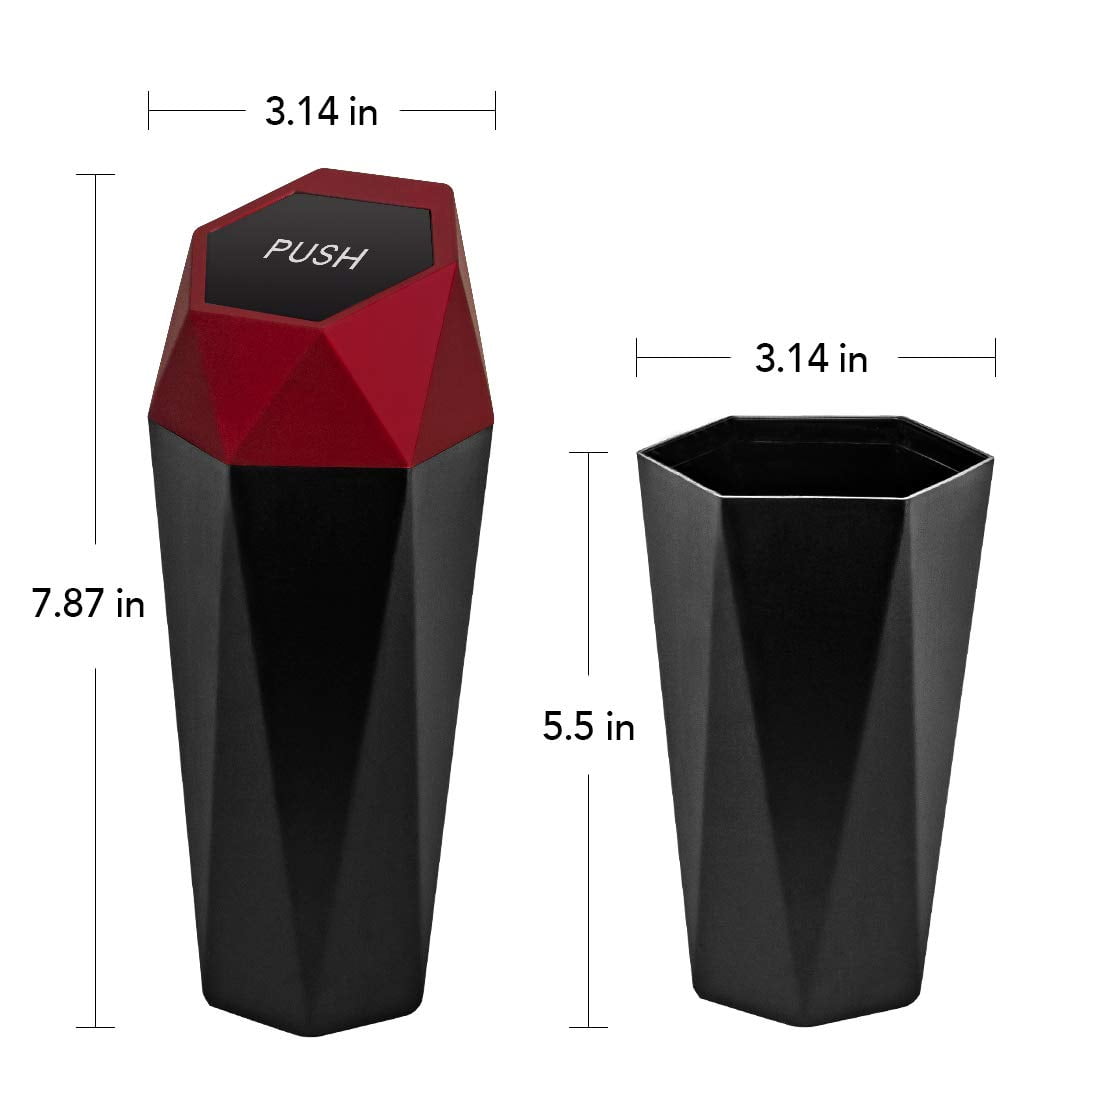 Yyeselk Car Trash Can with Lid, Diamond Design Small Automatic